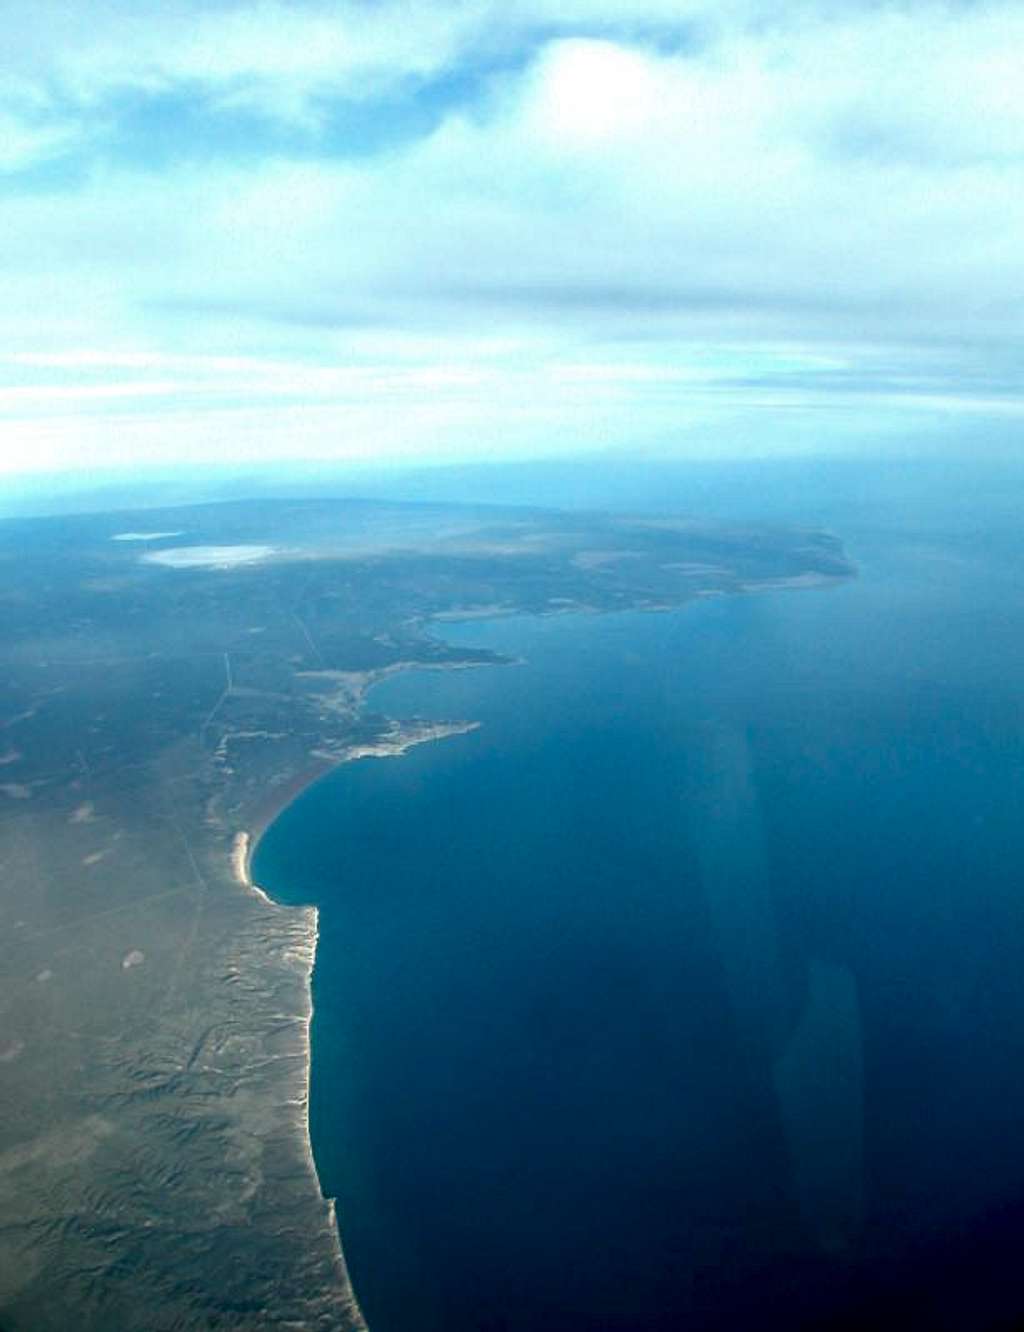 Peninsula Valdes - seen from the sky